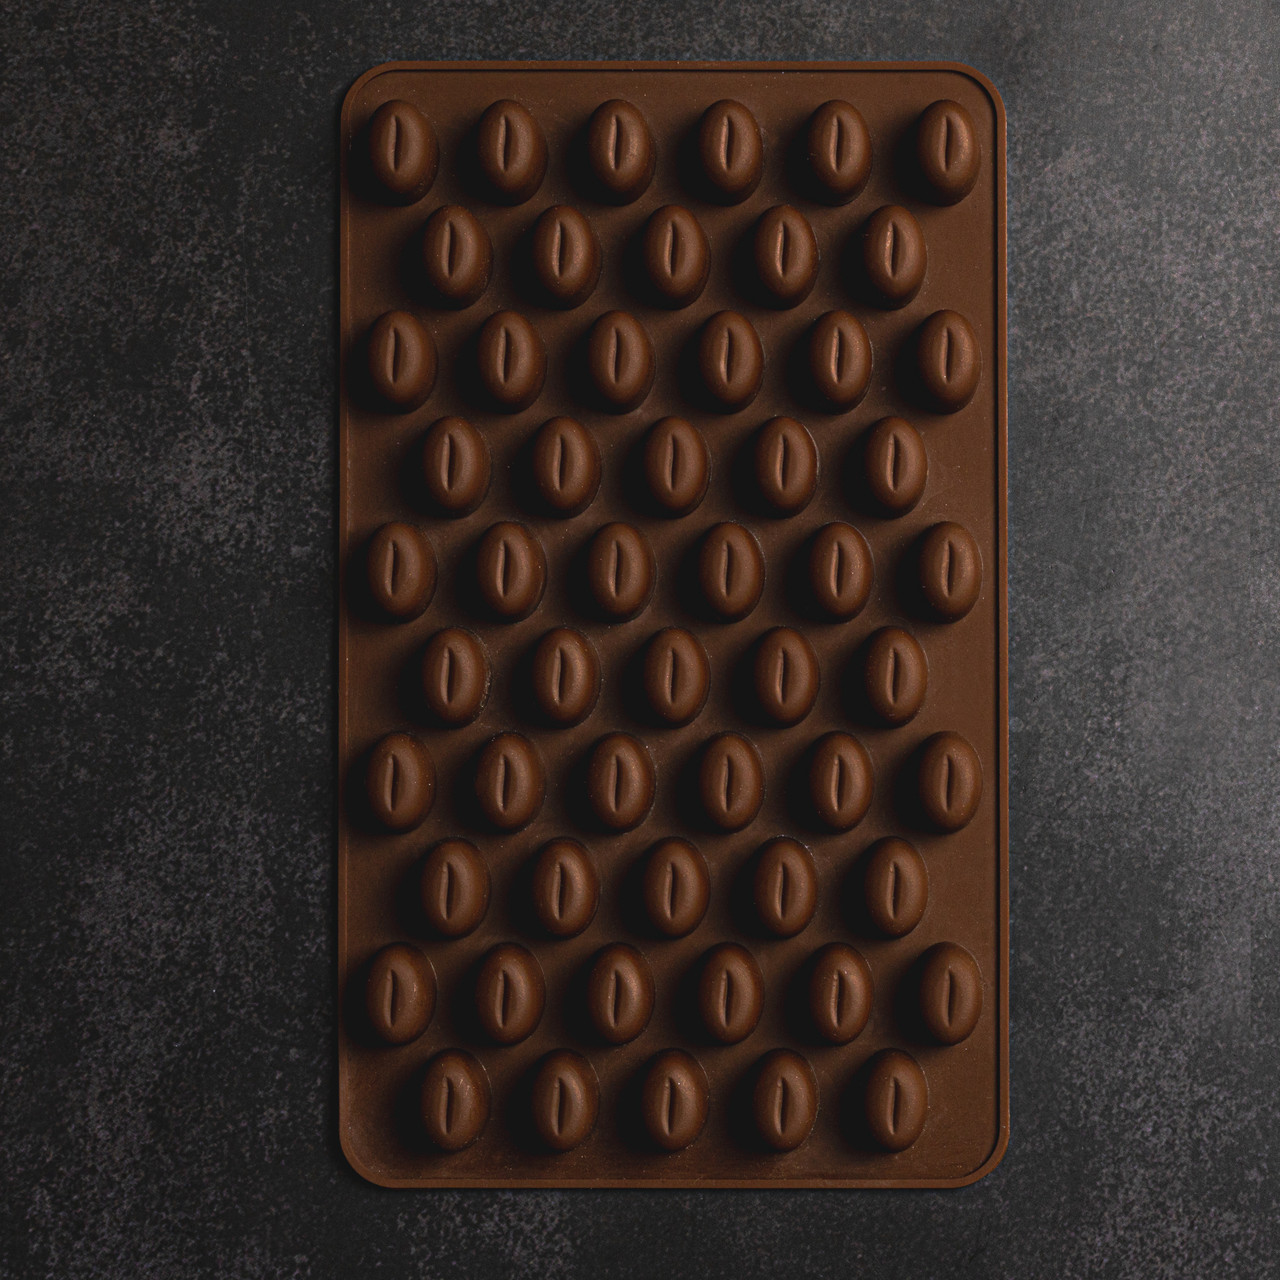 https://cdn11.bigcommerce.com/s-0544a/images/stencil/1280x1280/products/1324/3528/Coffee-Bean-Silicone-Mold-__83723.1700661047.jpg?c=2